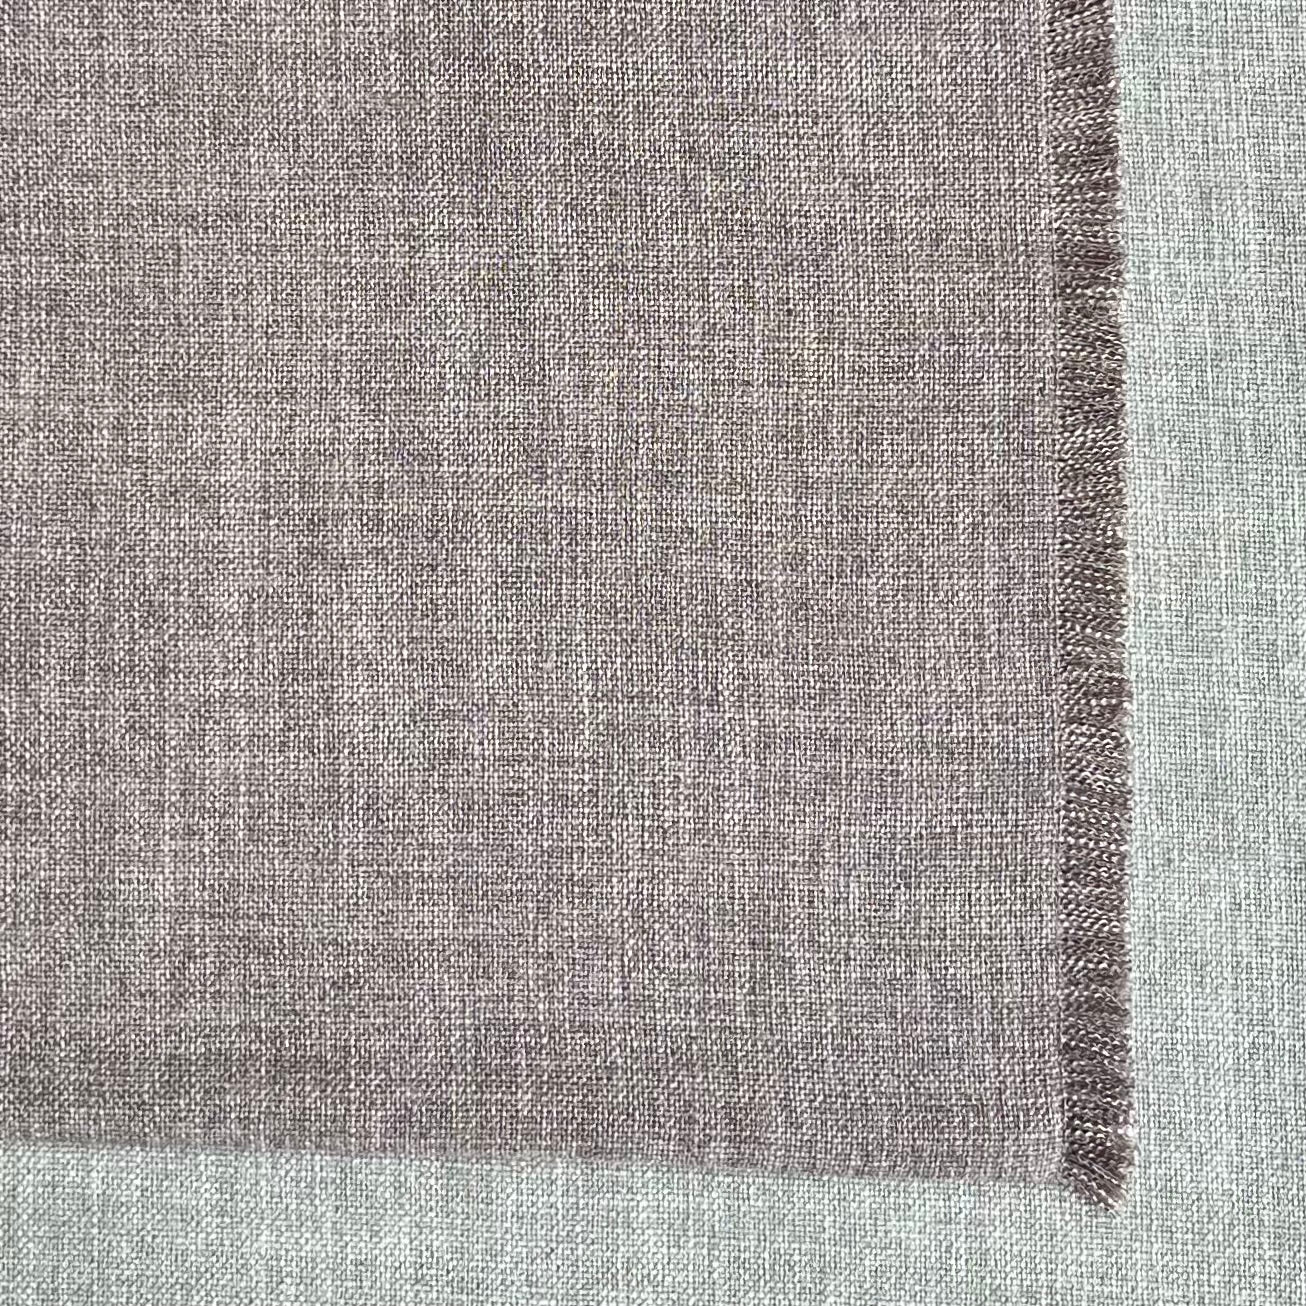 Nomad Heathered Placemat - Heather